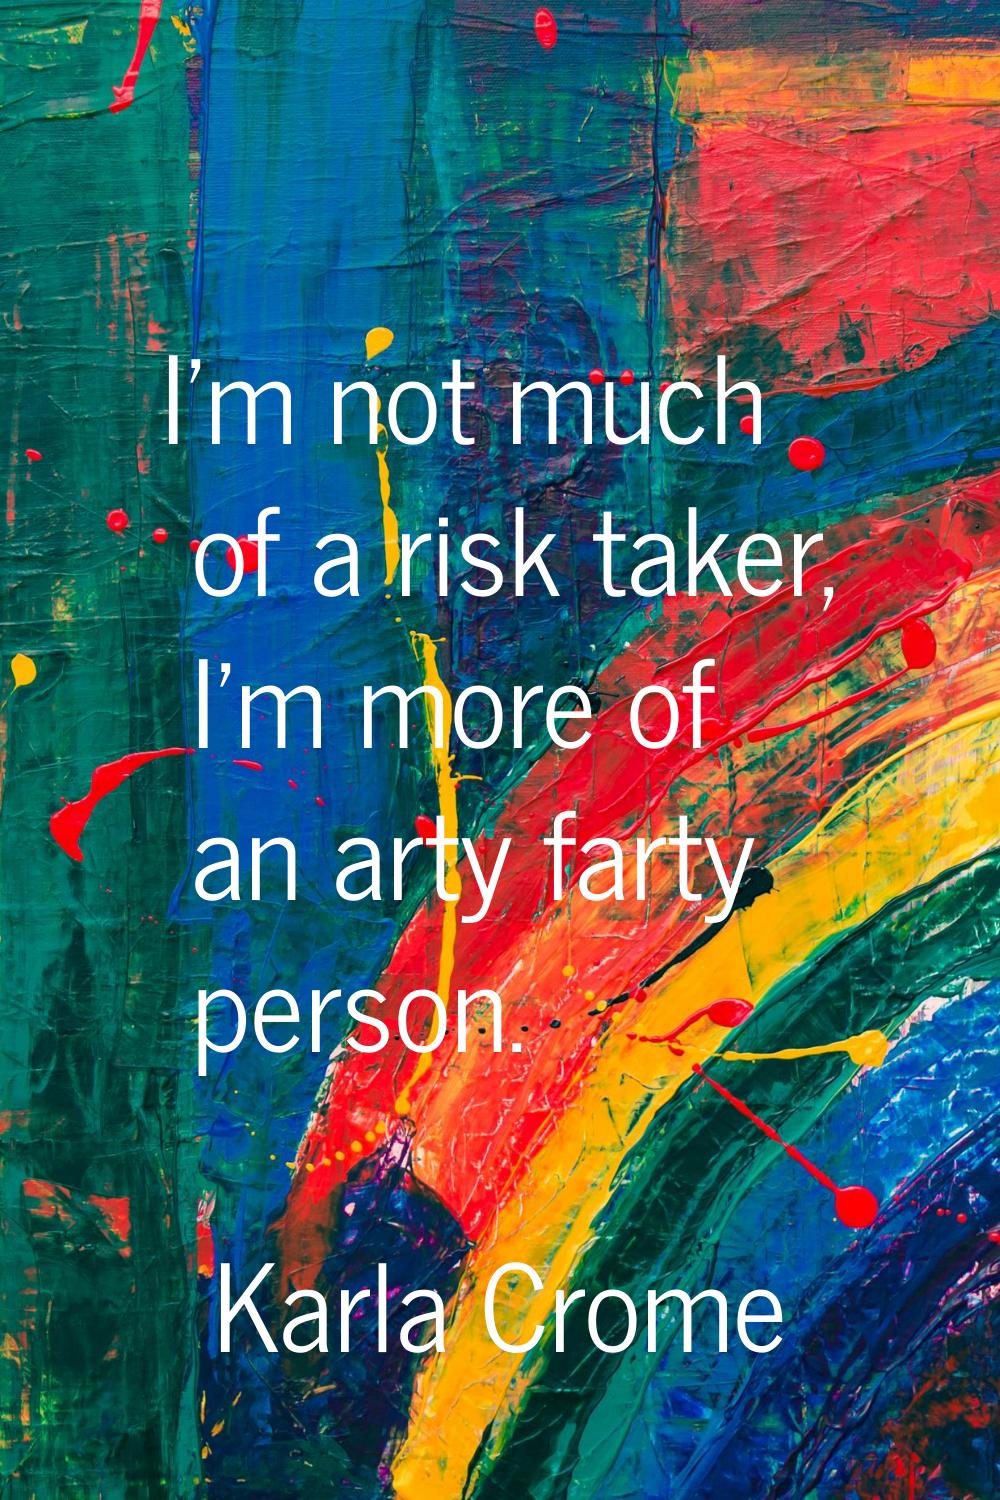 I'm not much of a risk taker, I'm more of an arty farty person.